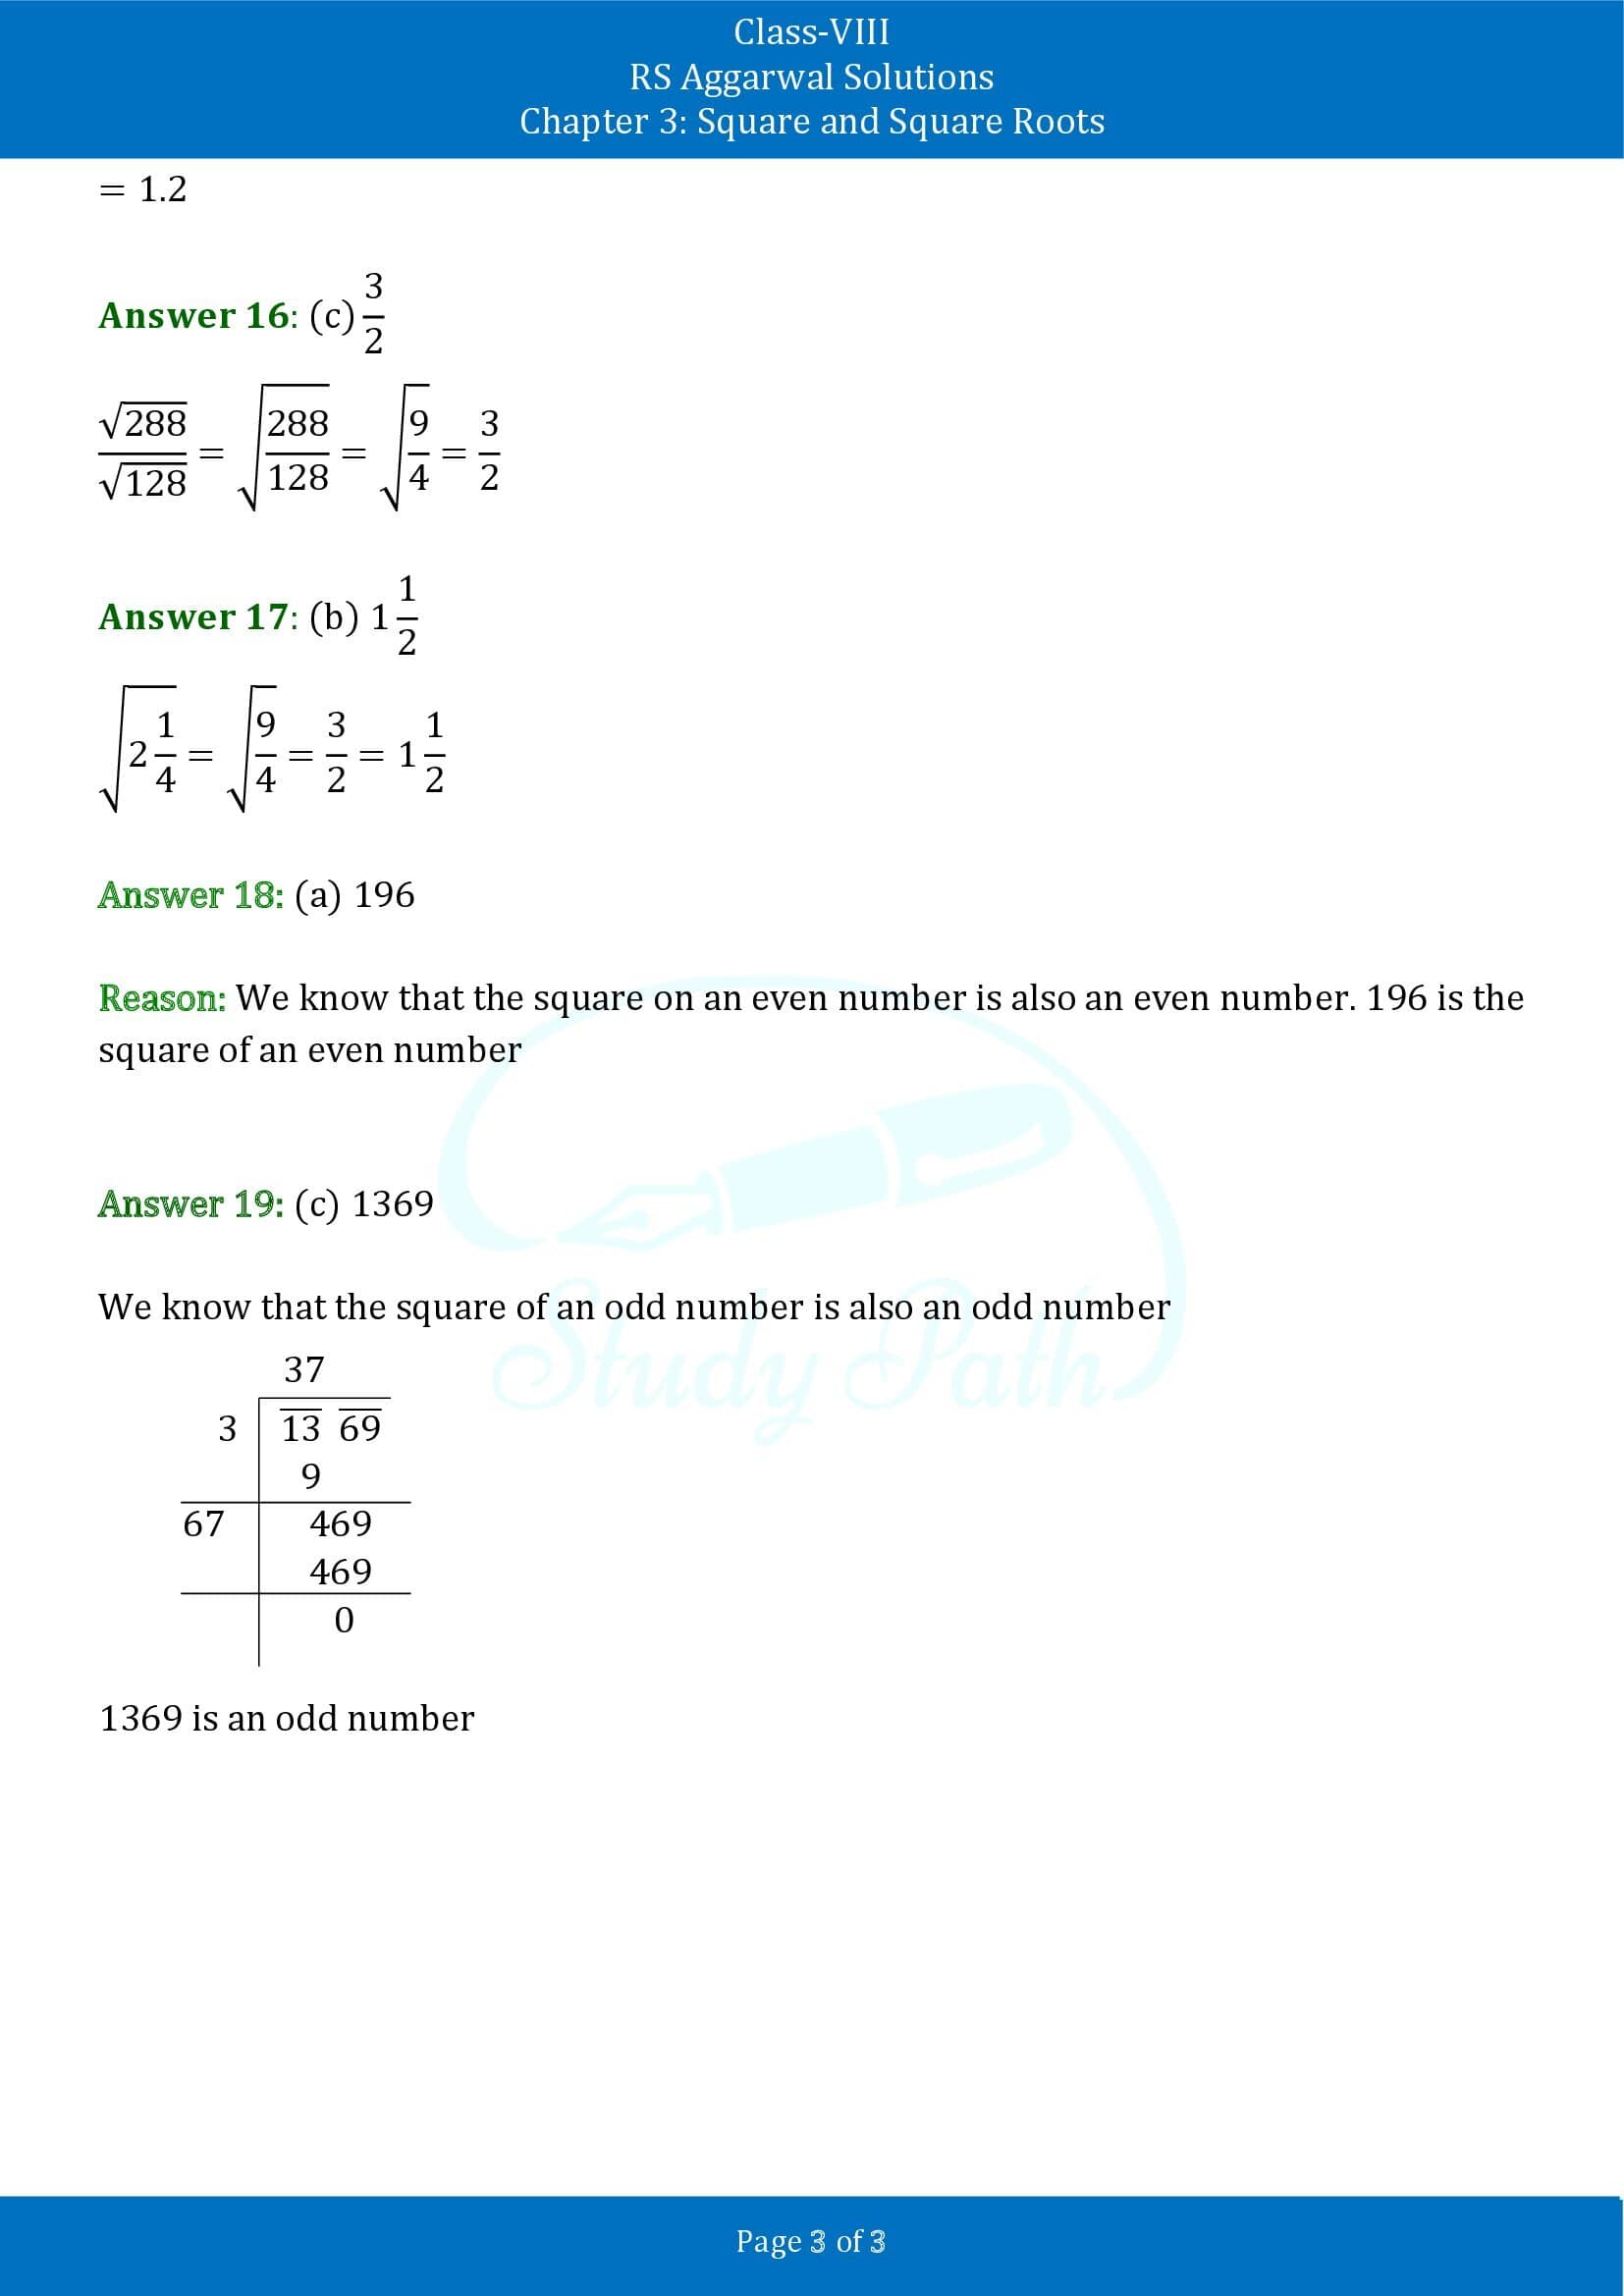 RS Aggarwal Solutions Class 8 Chapter 3 Square and Square Roots Exercise 3H MCQs 00003